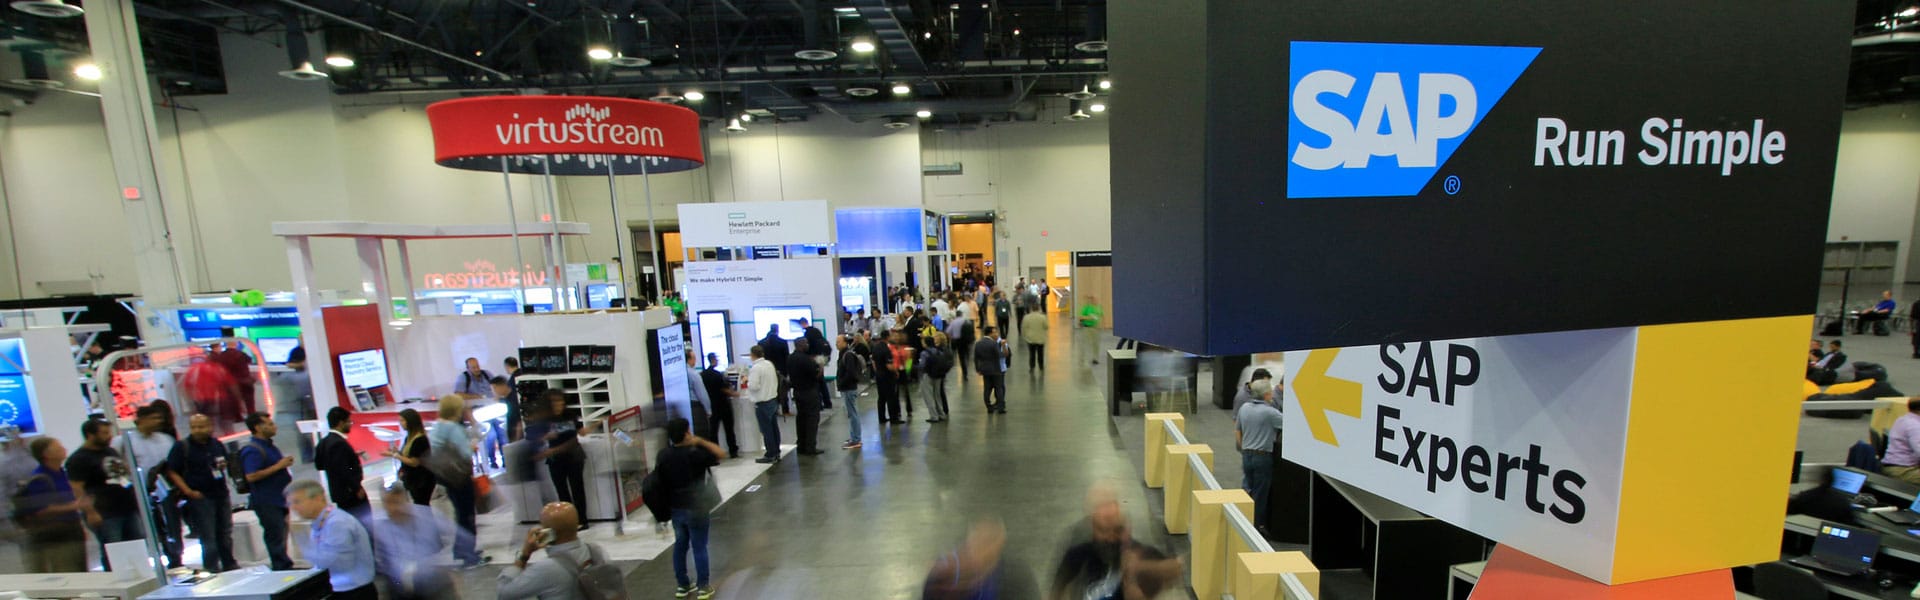 Take the SAP TechEd Learning Journey: Non-Stop Innovation